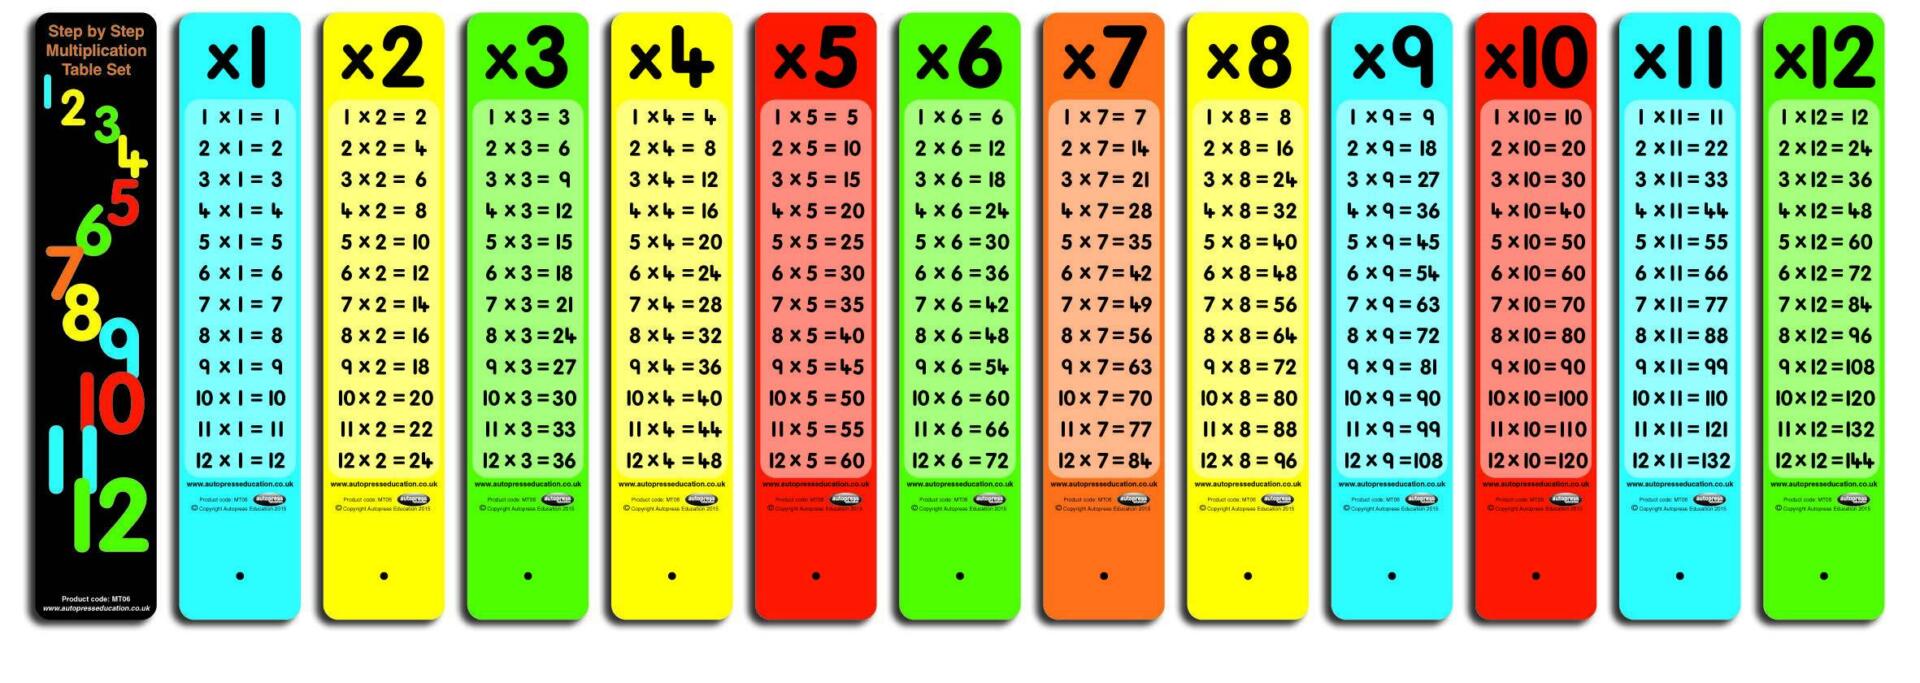 step-by-step-multiplication-table-set-autopress-education